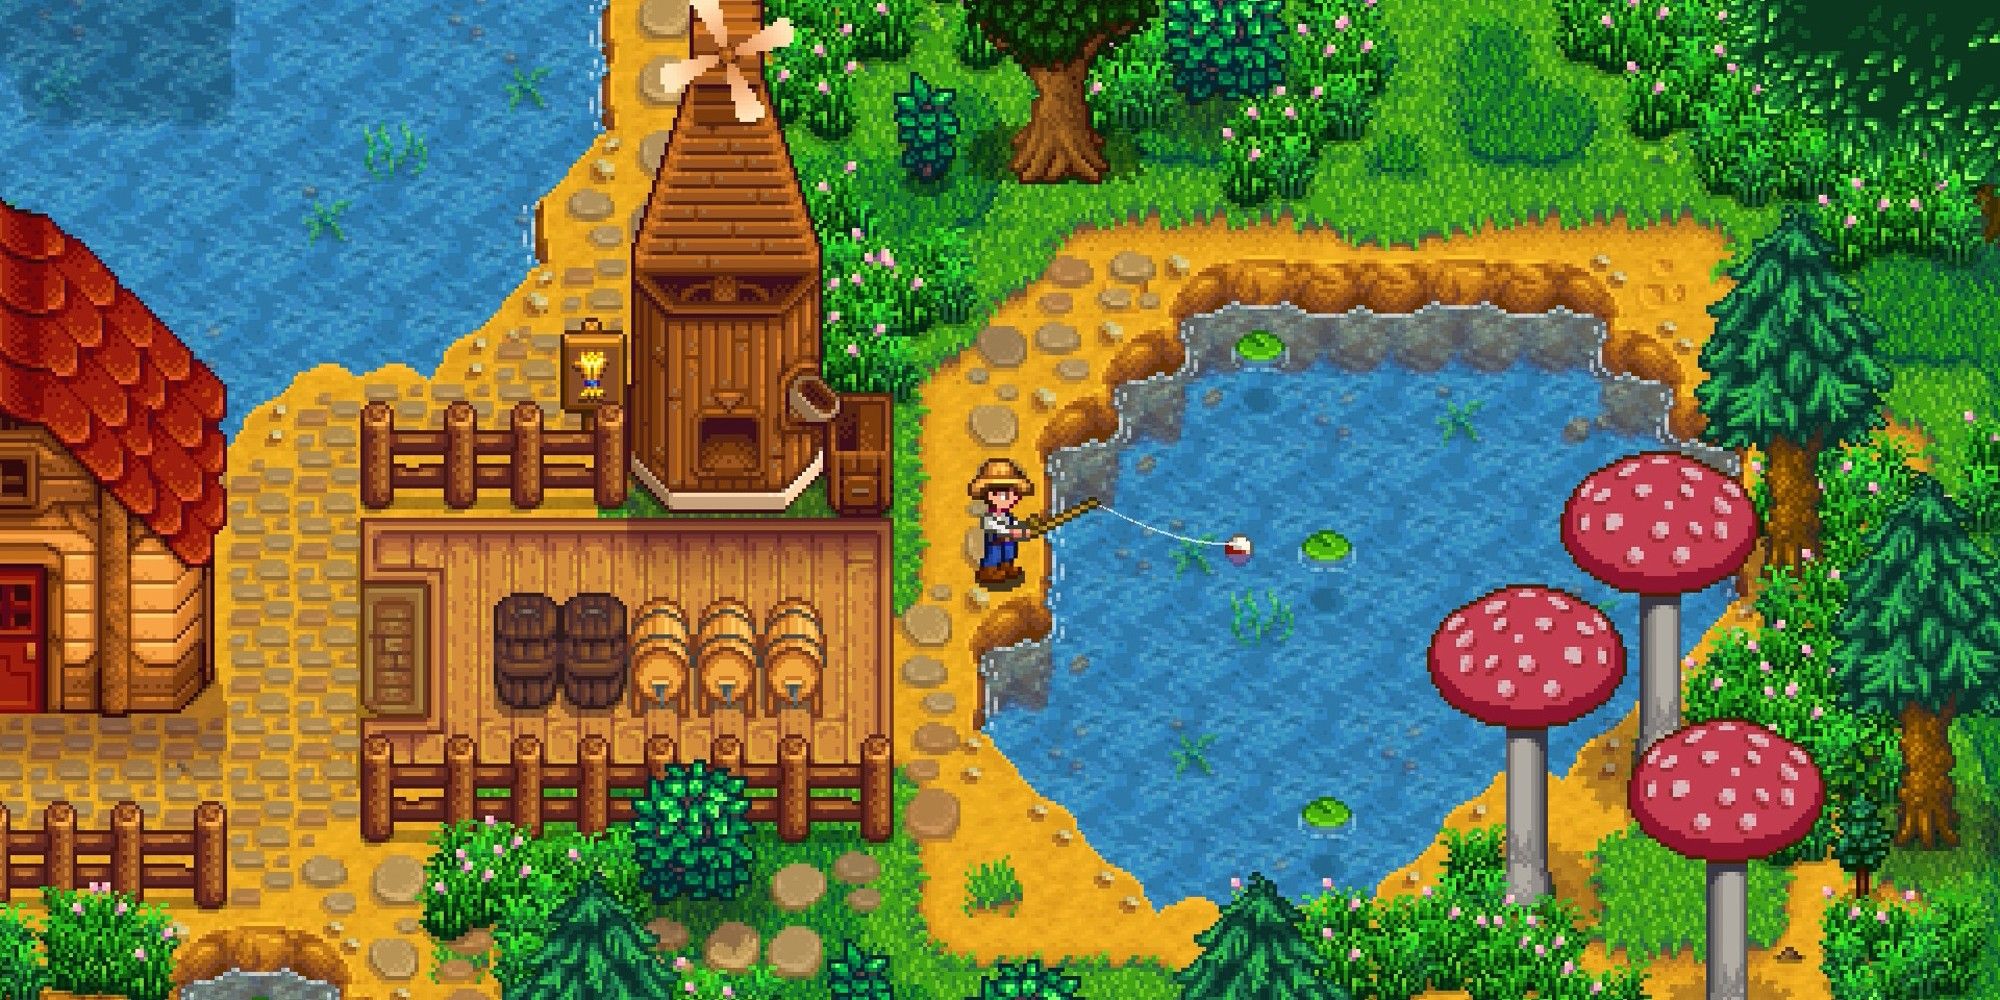 Stardew Valley character fishing on their farm